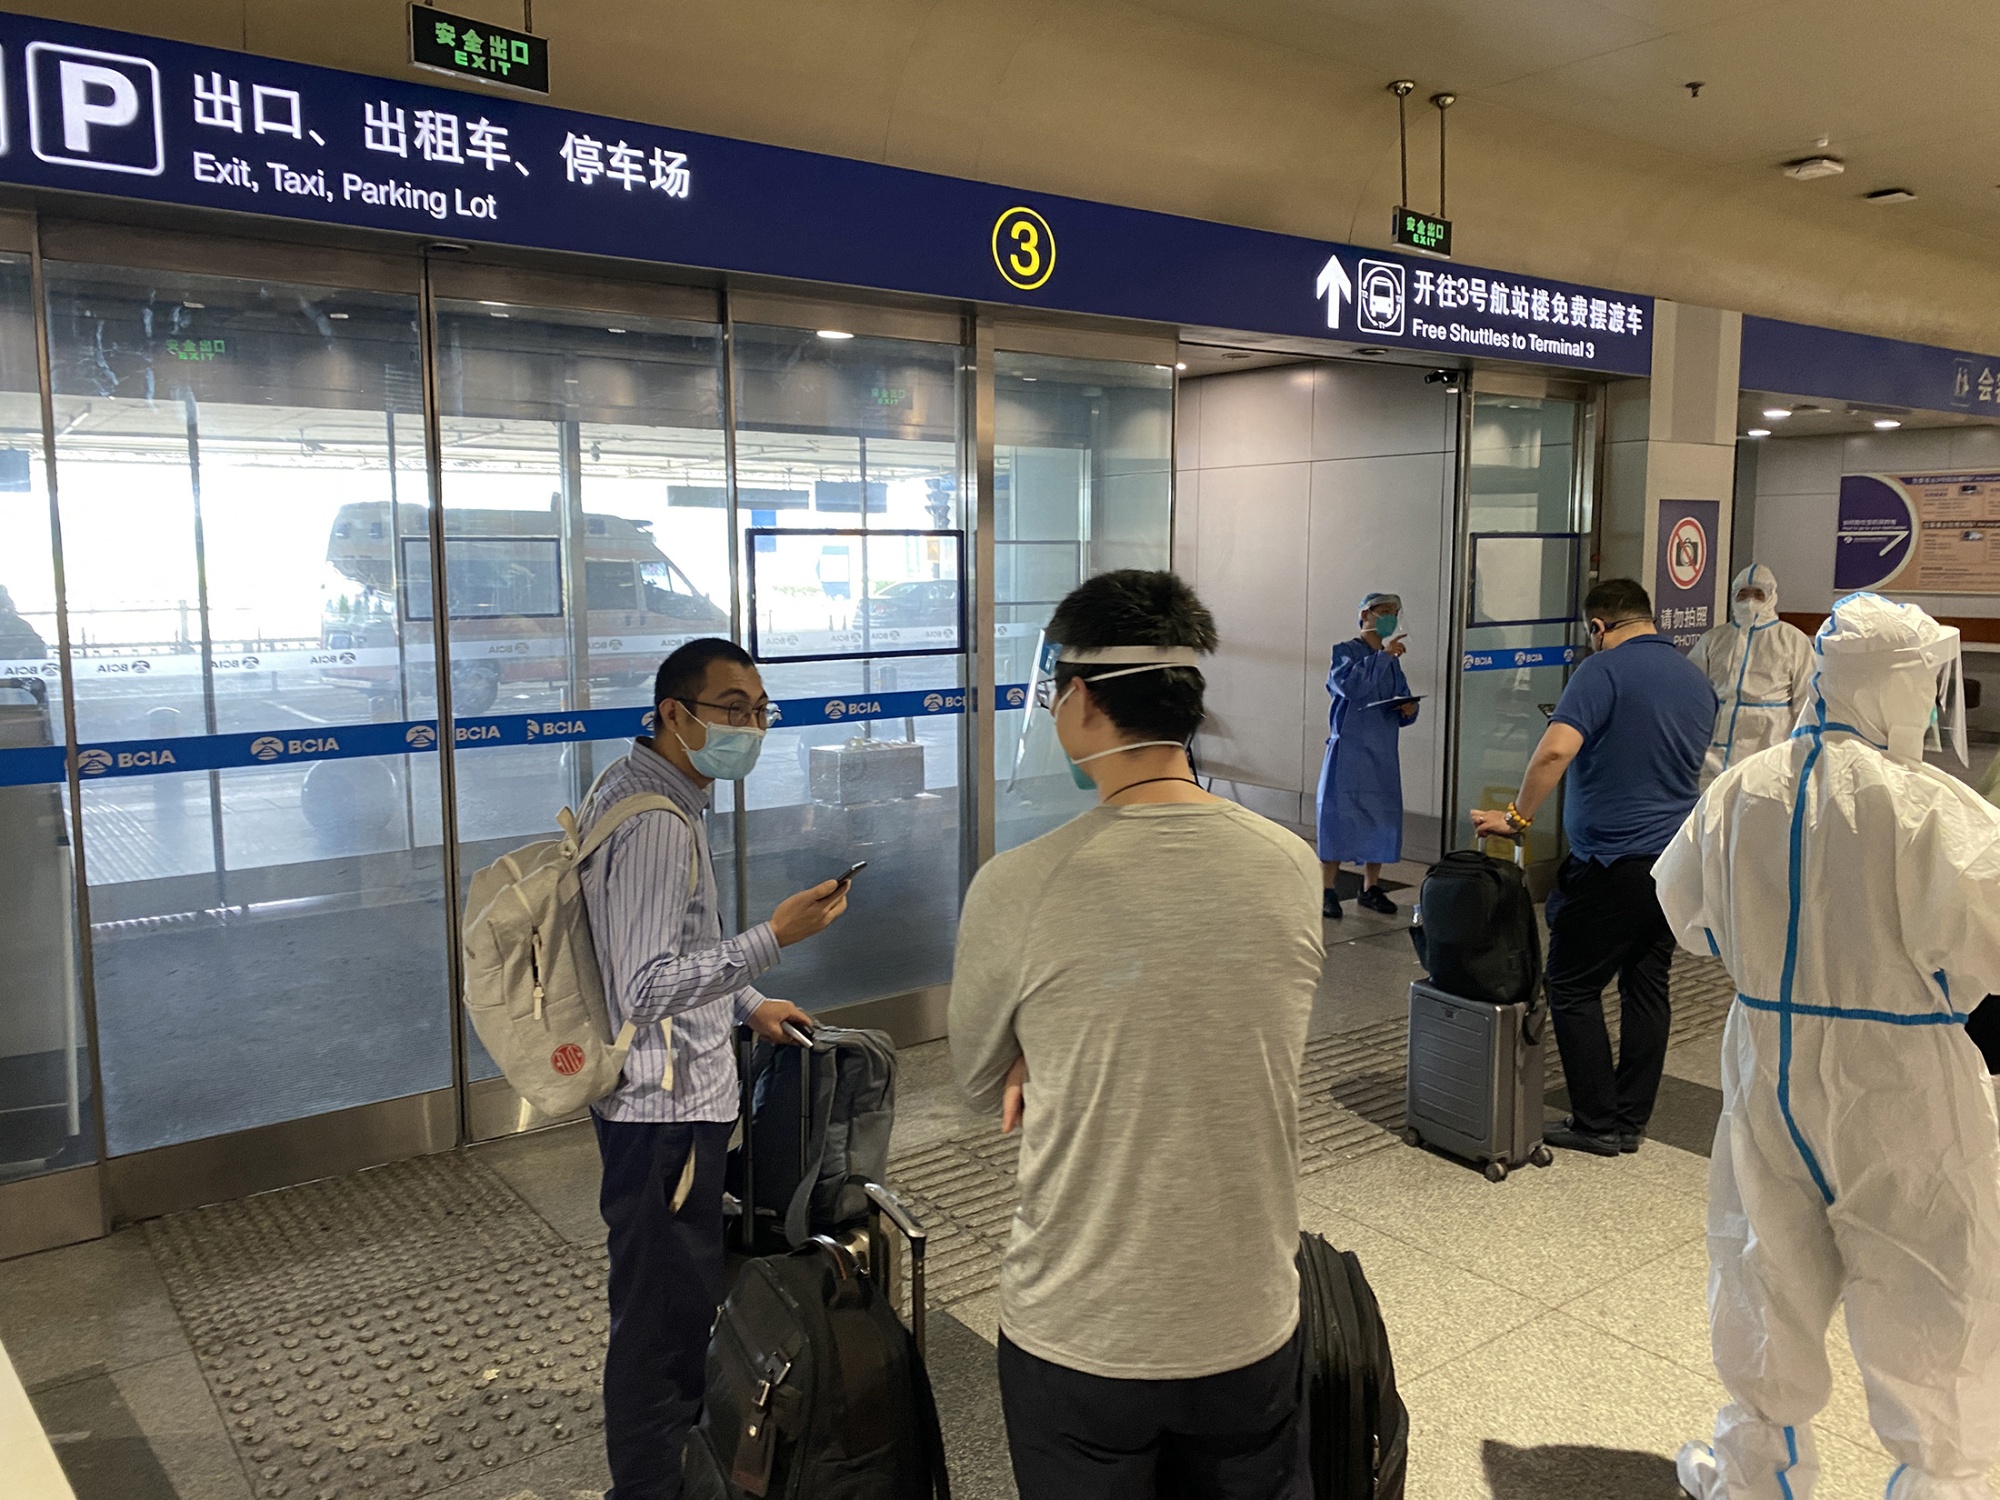 Pudong Airport Taxi: Your Ultimate Guide